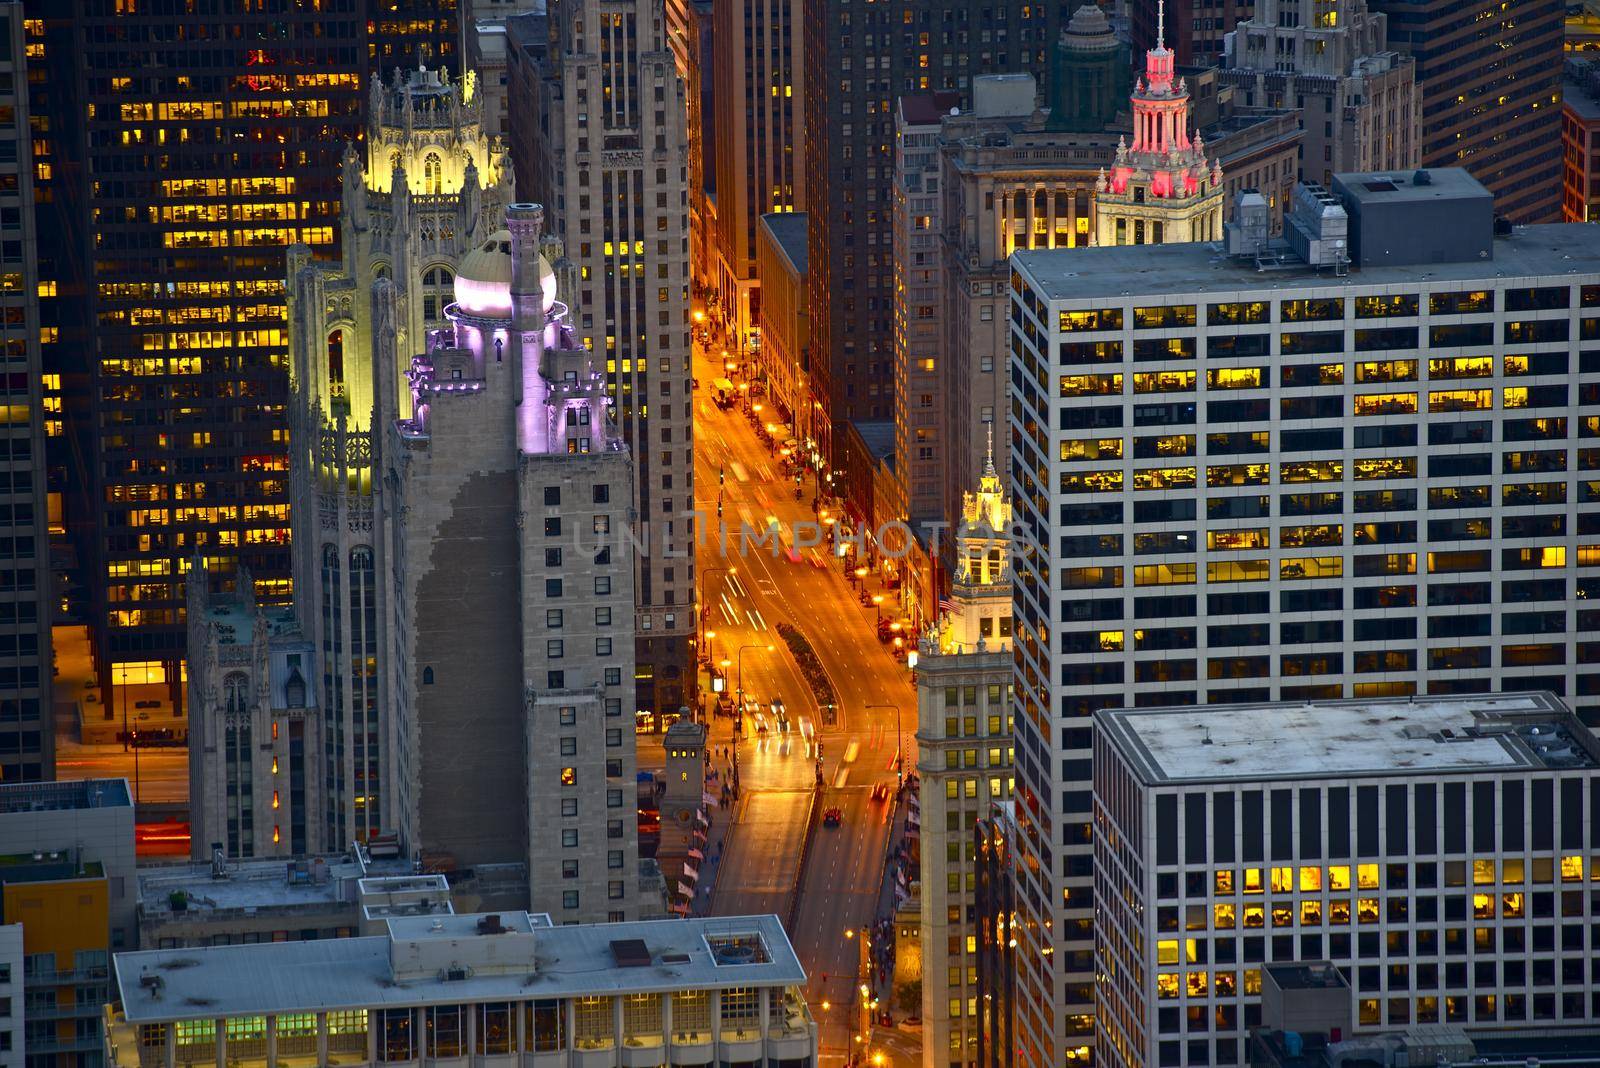 Streets of Chicago at Night - Bird Eye View. Michigan Avenue. Chicago, USA by welcomia